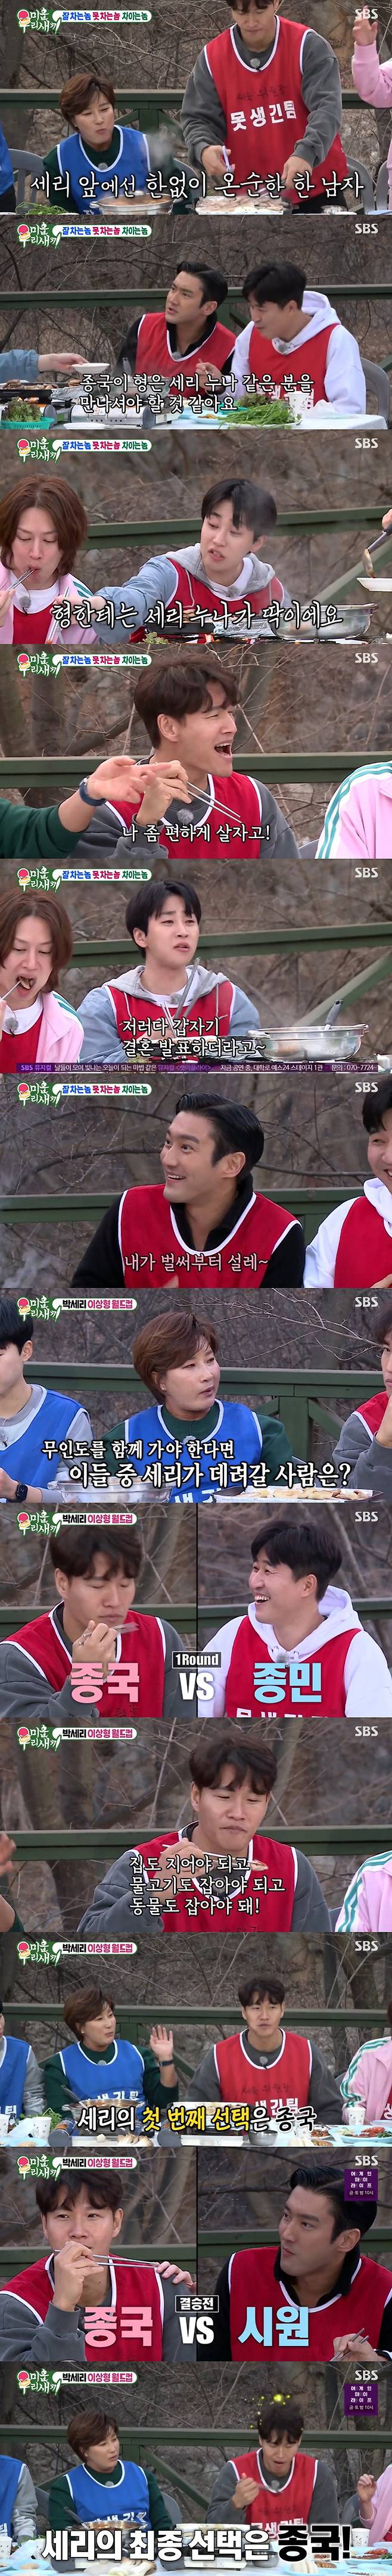 My Little Old Boy was pink from Open Couple Kim Jun-ho Kim Ji-min to Kim Jong-kook Pak Se-ri, who emanated Sweet Salvation Kemi.In SBS My Little Old Boy broadcast on the last 10 days, the second story of Kim Jong-kook team vs. Pak Se-ri team, which played a friendly match last week, was revealed.After a fierce footwear match on the day, Kim Jong-kook and Pak Se-ris tit-for-tat Kemi continued in the backseat.If you dont drink, cut off even the meat, Pak Se-ri told the drunk Kim Jong-kook, who handed over the scissors to Kim Jong-kook.The members who saw Kim Jong-kook cutting meat as Pak Se-ri said, The end is not at all for Serri.Choi Siwon, who watched this carefully, said, Is not it that you are two, and your tikitaka is so good together?But Pak Se-ri said, Its a dangerous statement, and Kim Jong-kook also said, I do not know Tikitaka, and my face really resembles it.Pak Se-ri, who heard this, laughed, saying, This is why you two are not marriageing. Do not say anything.Then, Kim Jong-kook continued to bake meat, and Dindin repeatedly surprised that the last brother bakes meat next to Serris sister, and Choi Siwon said, The last brother seems to have to meet someone like Serris sister.My sister-in-law .. , he produced a pink atmosphere of Pak Se-ri and Kim Jong-kook.However, Kim Jong-kook was furious, and Pak Se-ri also showed a defensive defense of the steel wall, saying, I hate it too, I can not live with this man.Nevertheless, the members said, I suddenly announced marriage, I am already excited, and made the couple born.It was then played in the Pak Se-ris ideal World Cup.To Pak Se-ri, Kim Hee-chul asked, If you have to go to the uninhabited island together, who will take Kim Jong-kook and Kim Jong-min?So Pak Se-ri said Kim Jong-kook, I think Im going to do a good job because Im strong.Pak Se-ri, who also named Kim Jong-kook among Kim Jong-kook and Choi Siwon, said,  (Kim Jong-kook is) someone to do anything.I have a strong life, he said, revealing why he chose Kim Jong-kook.On the other hand, in the trailer video next week released at the end of the broadcast, Kim Jun-ho confessed to the members that he was dating Kim Ji-min.Kim Jun-ho carefully declared in front of Tak Jae-hoon, Lee Sang-min and Kim Jong-kook, I have a GFriend.But the members said, Are you not sober? April Fools Day is yesterday. Why are you joking about it?It turned out that everyone was distrustful before the two peoples devotion story.However, Kim Jun-ho repeatedly informed that GFriend is actually Kim Ji-min, and the members called Kim Jun-ho on the spot after confirming Kim Ji-mins number.But over the receiver, a message came out saying, No number you have now called, and the members said, It is a mental illness. Why is that?Kim Jun-ho was frustrated, saying, Im going to fucking fuck you, why would I tell you this? And then Kim Ji-min called.Kim Jun-ho hastily asked Kim Ji-min, Im dating Jimin? but Kim Ji-min did not easily answer, saying, Oh... thats it.Since then, the members have seriously said, Is it right to meet with Kim Jun-ho?I asked him, Can I believe and congratulate him? Kim Ji-min surprised everyone by explaining still.Kim Jun-ho and Kim Ji-mins agency said in an official position on March 3, Kim Jun-ho and Kim Ji-min, who are members of the same agency, are continuing serious meetings.